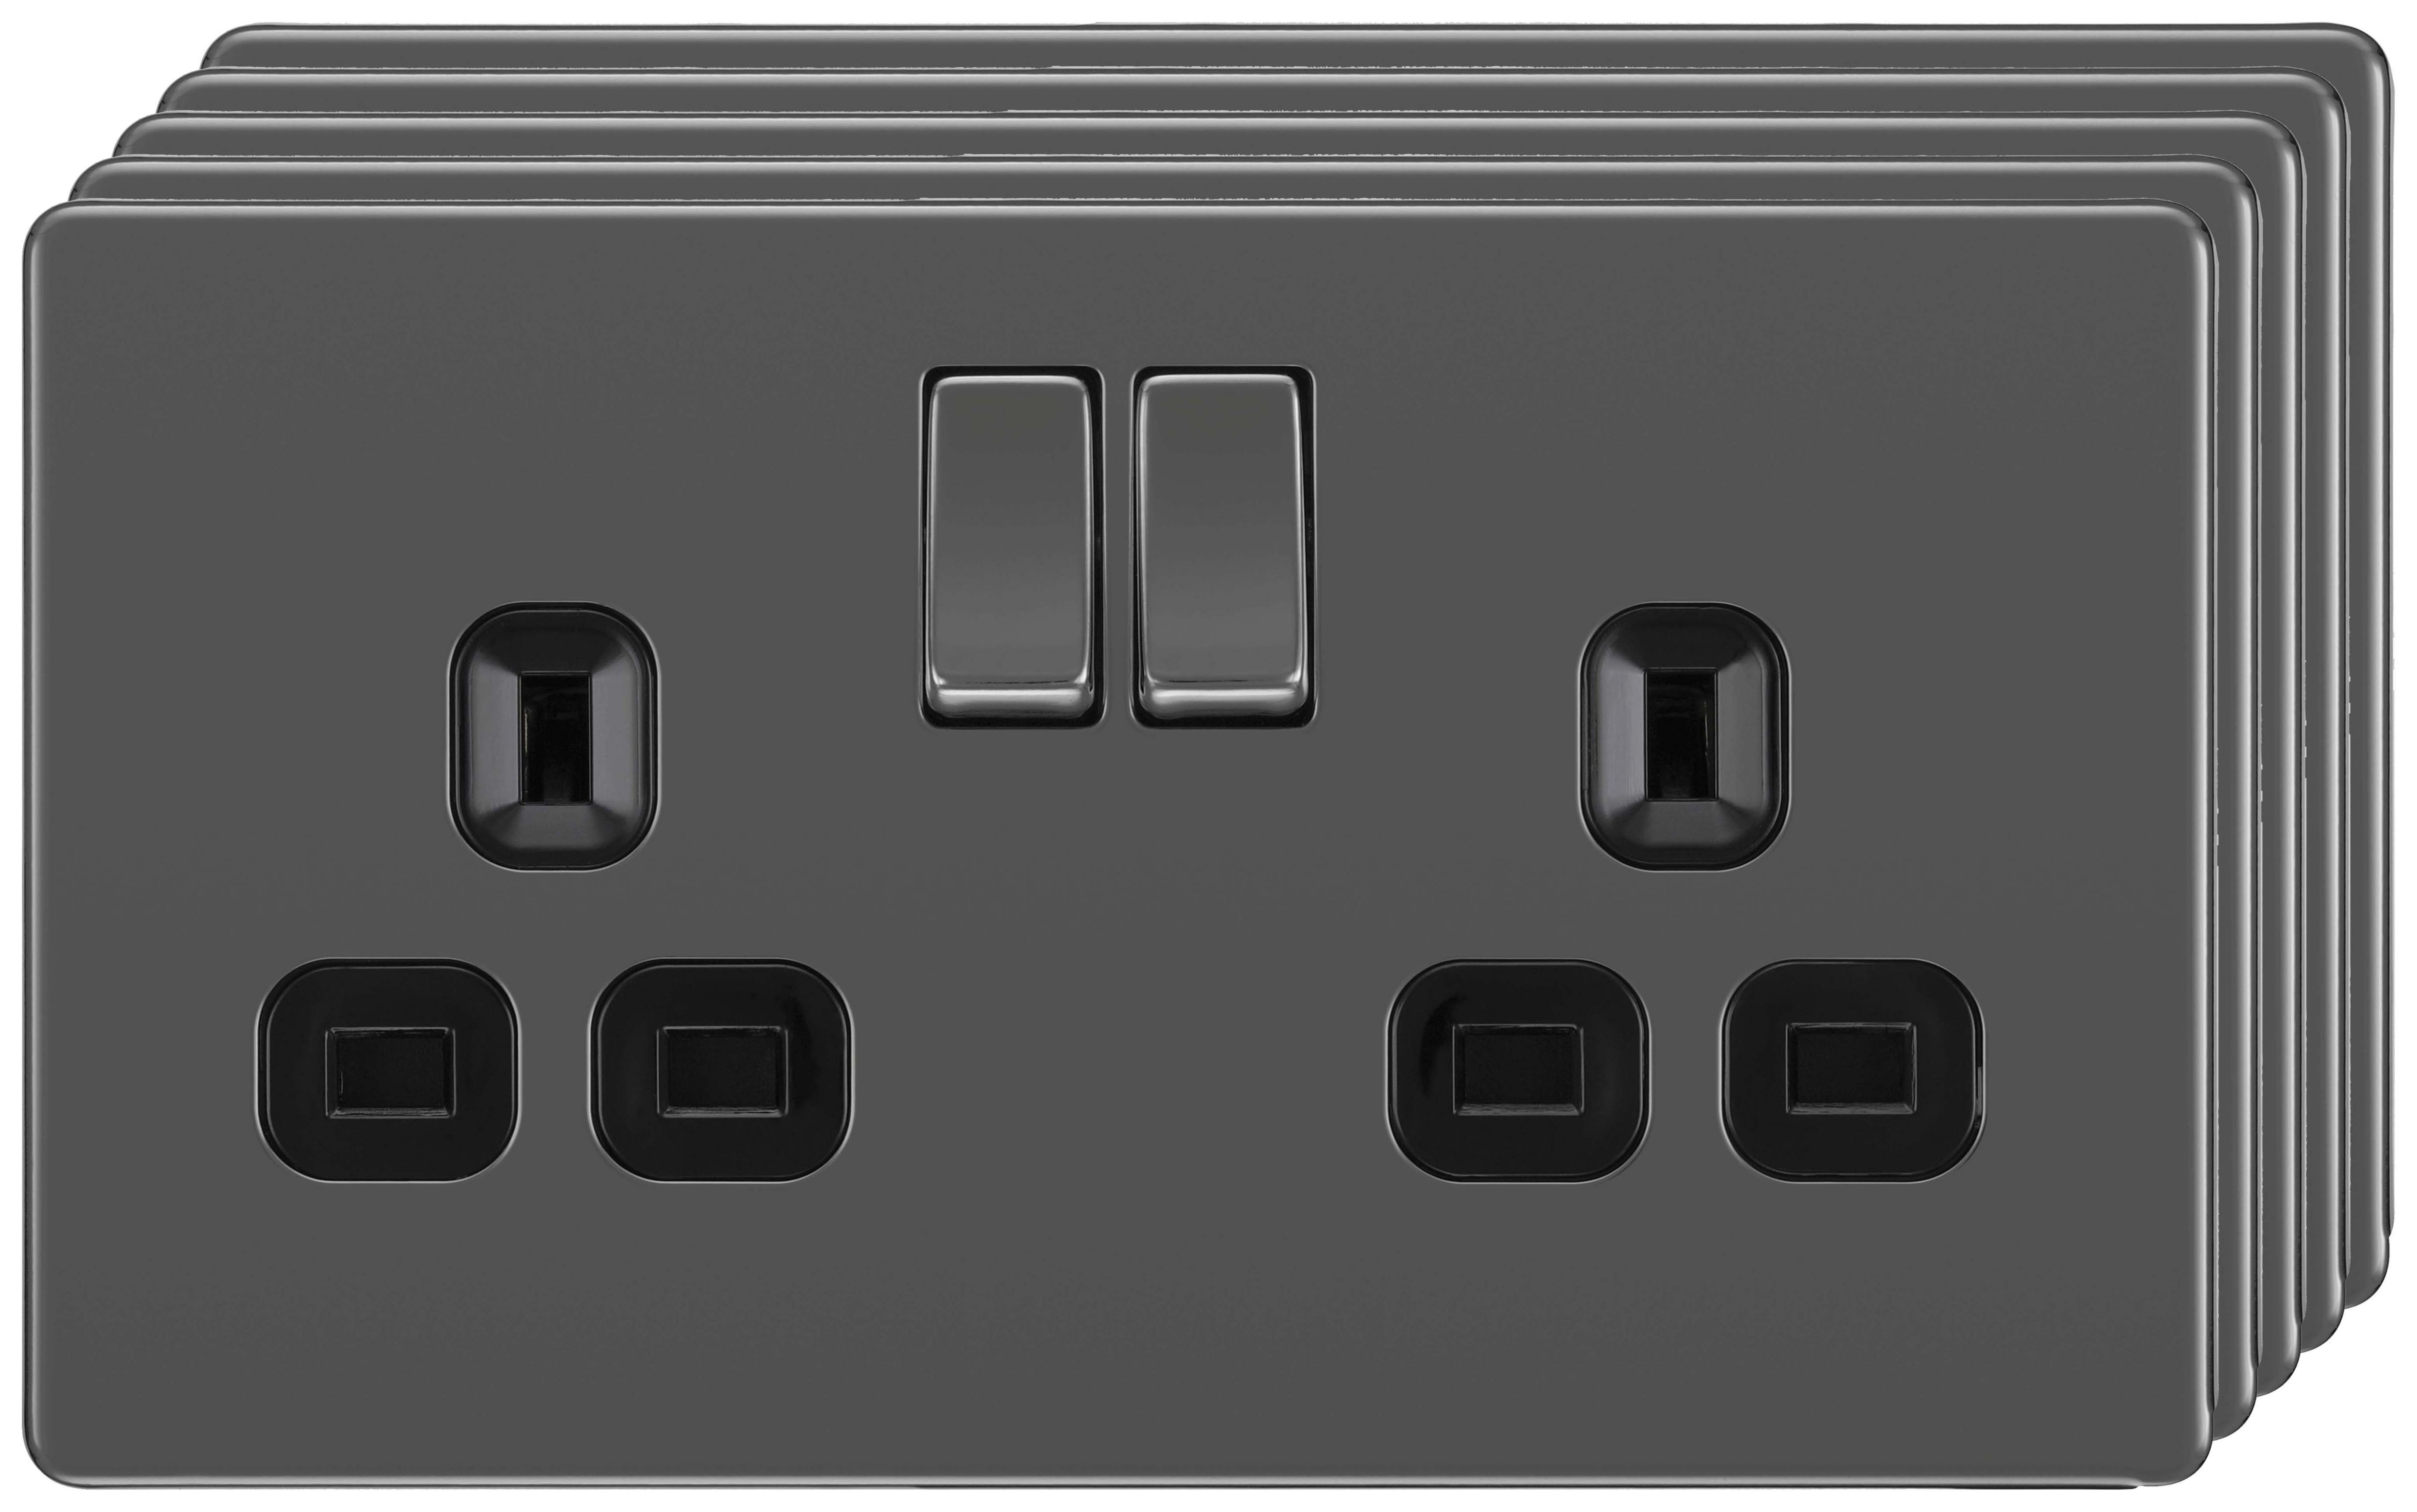 BG 13A Screwless Flat Plate Double Switched Power Socket Double Pole 5 Pack - Black Nickel